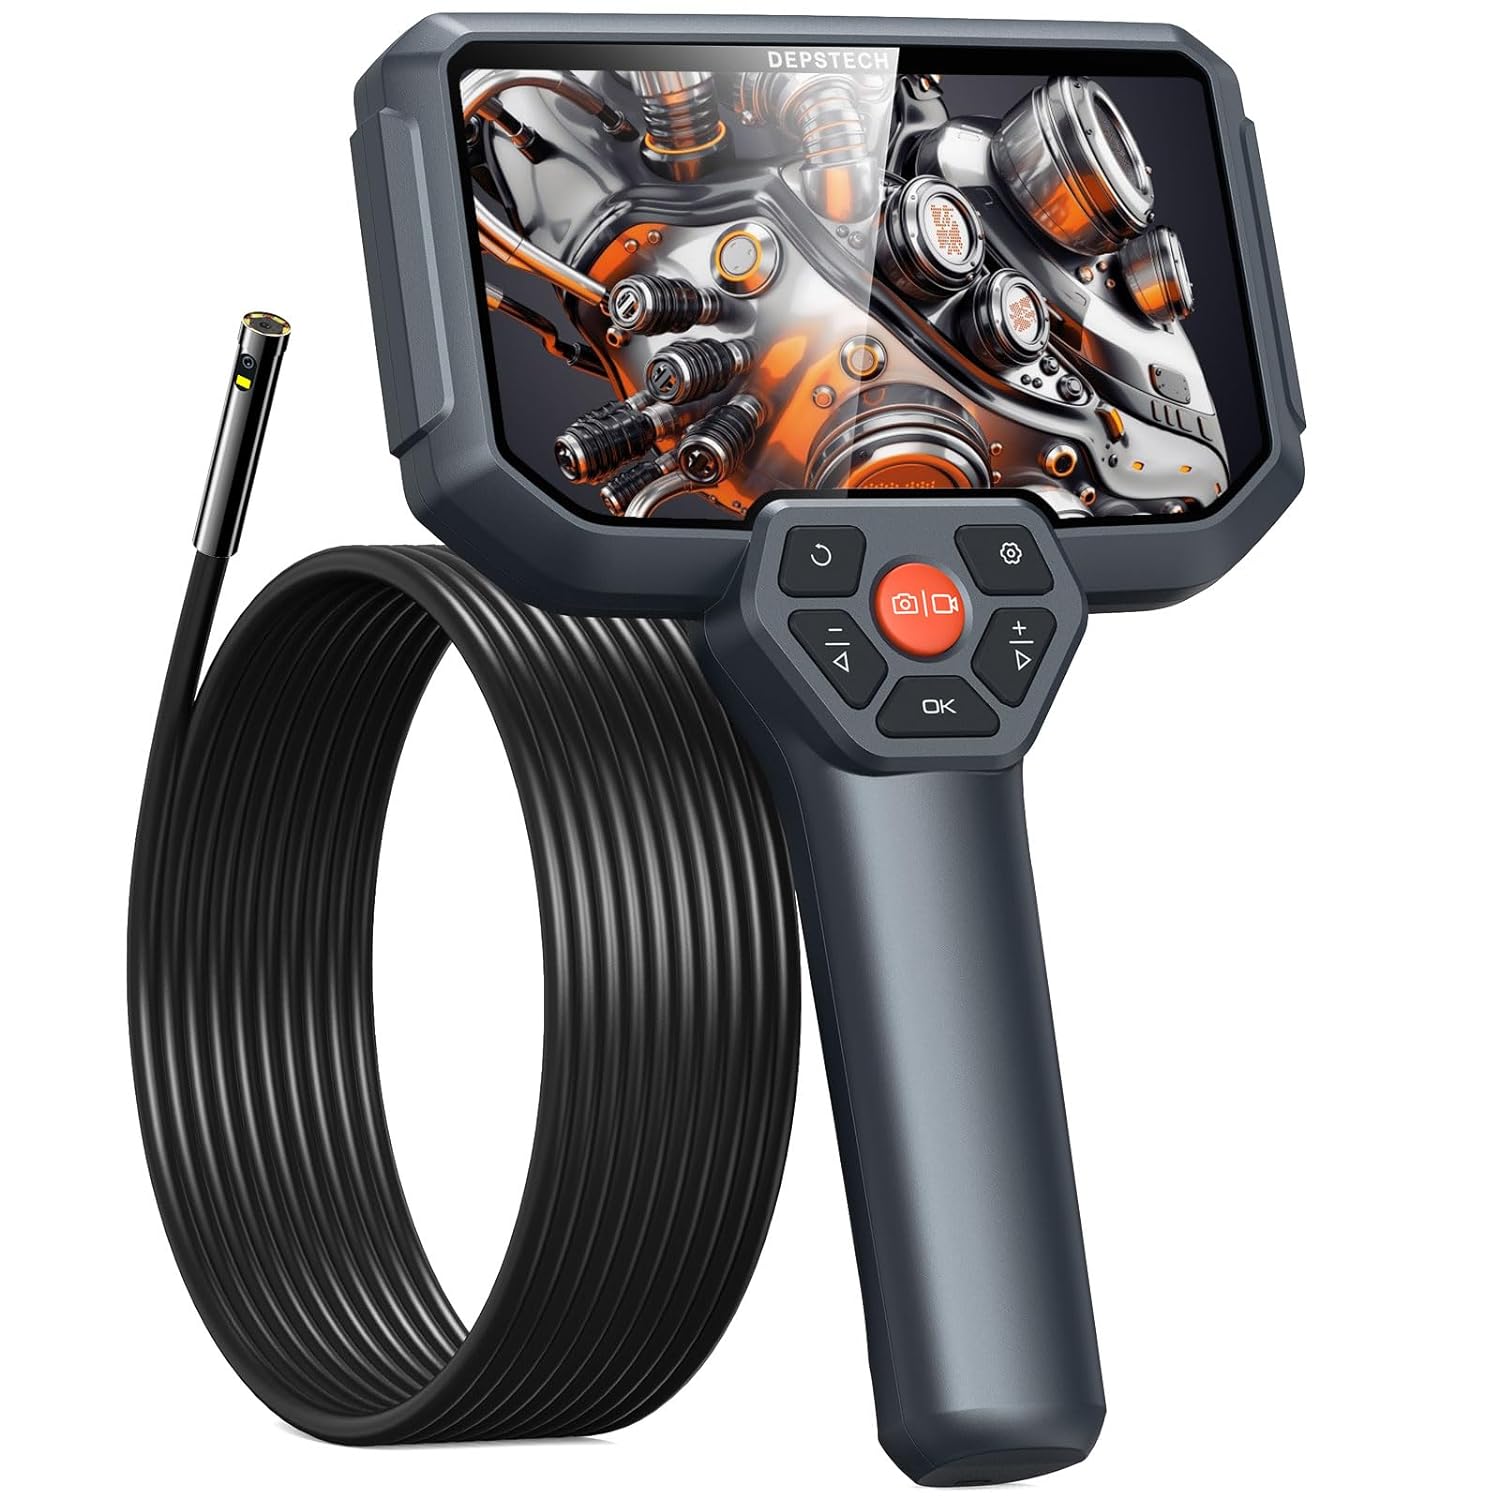 How To Use Depstech Endoscope ?